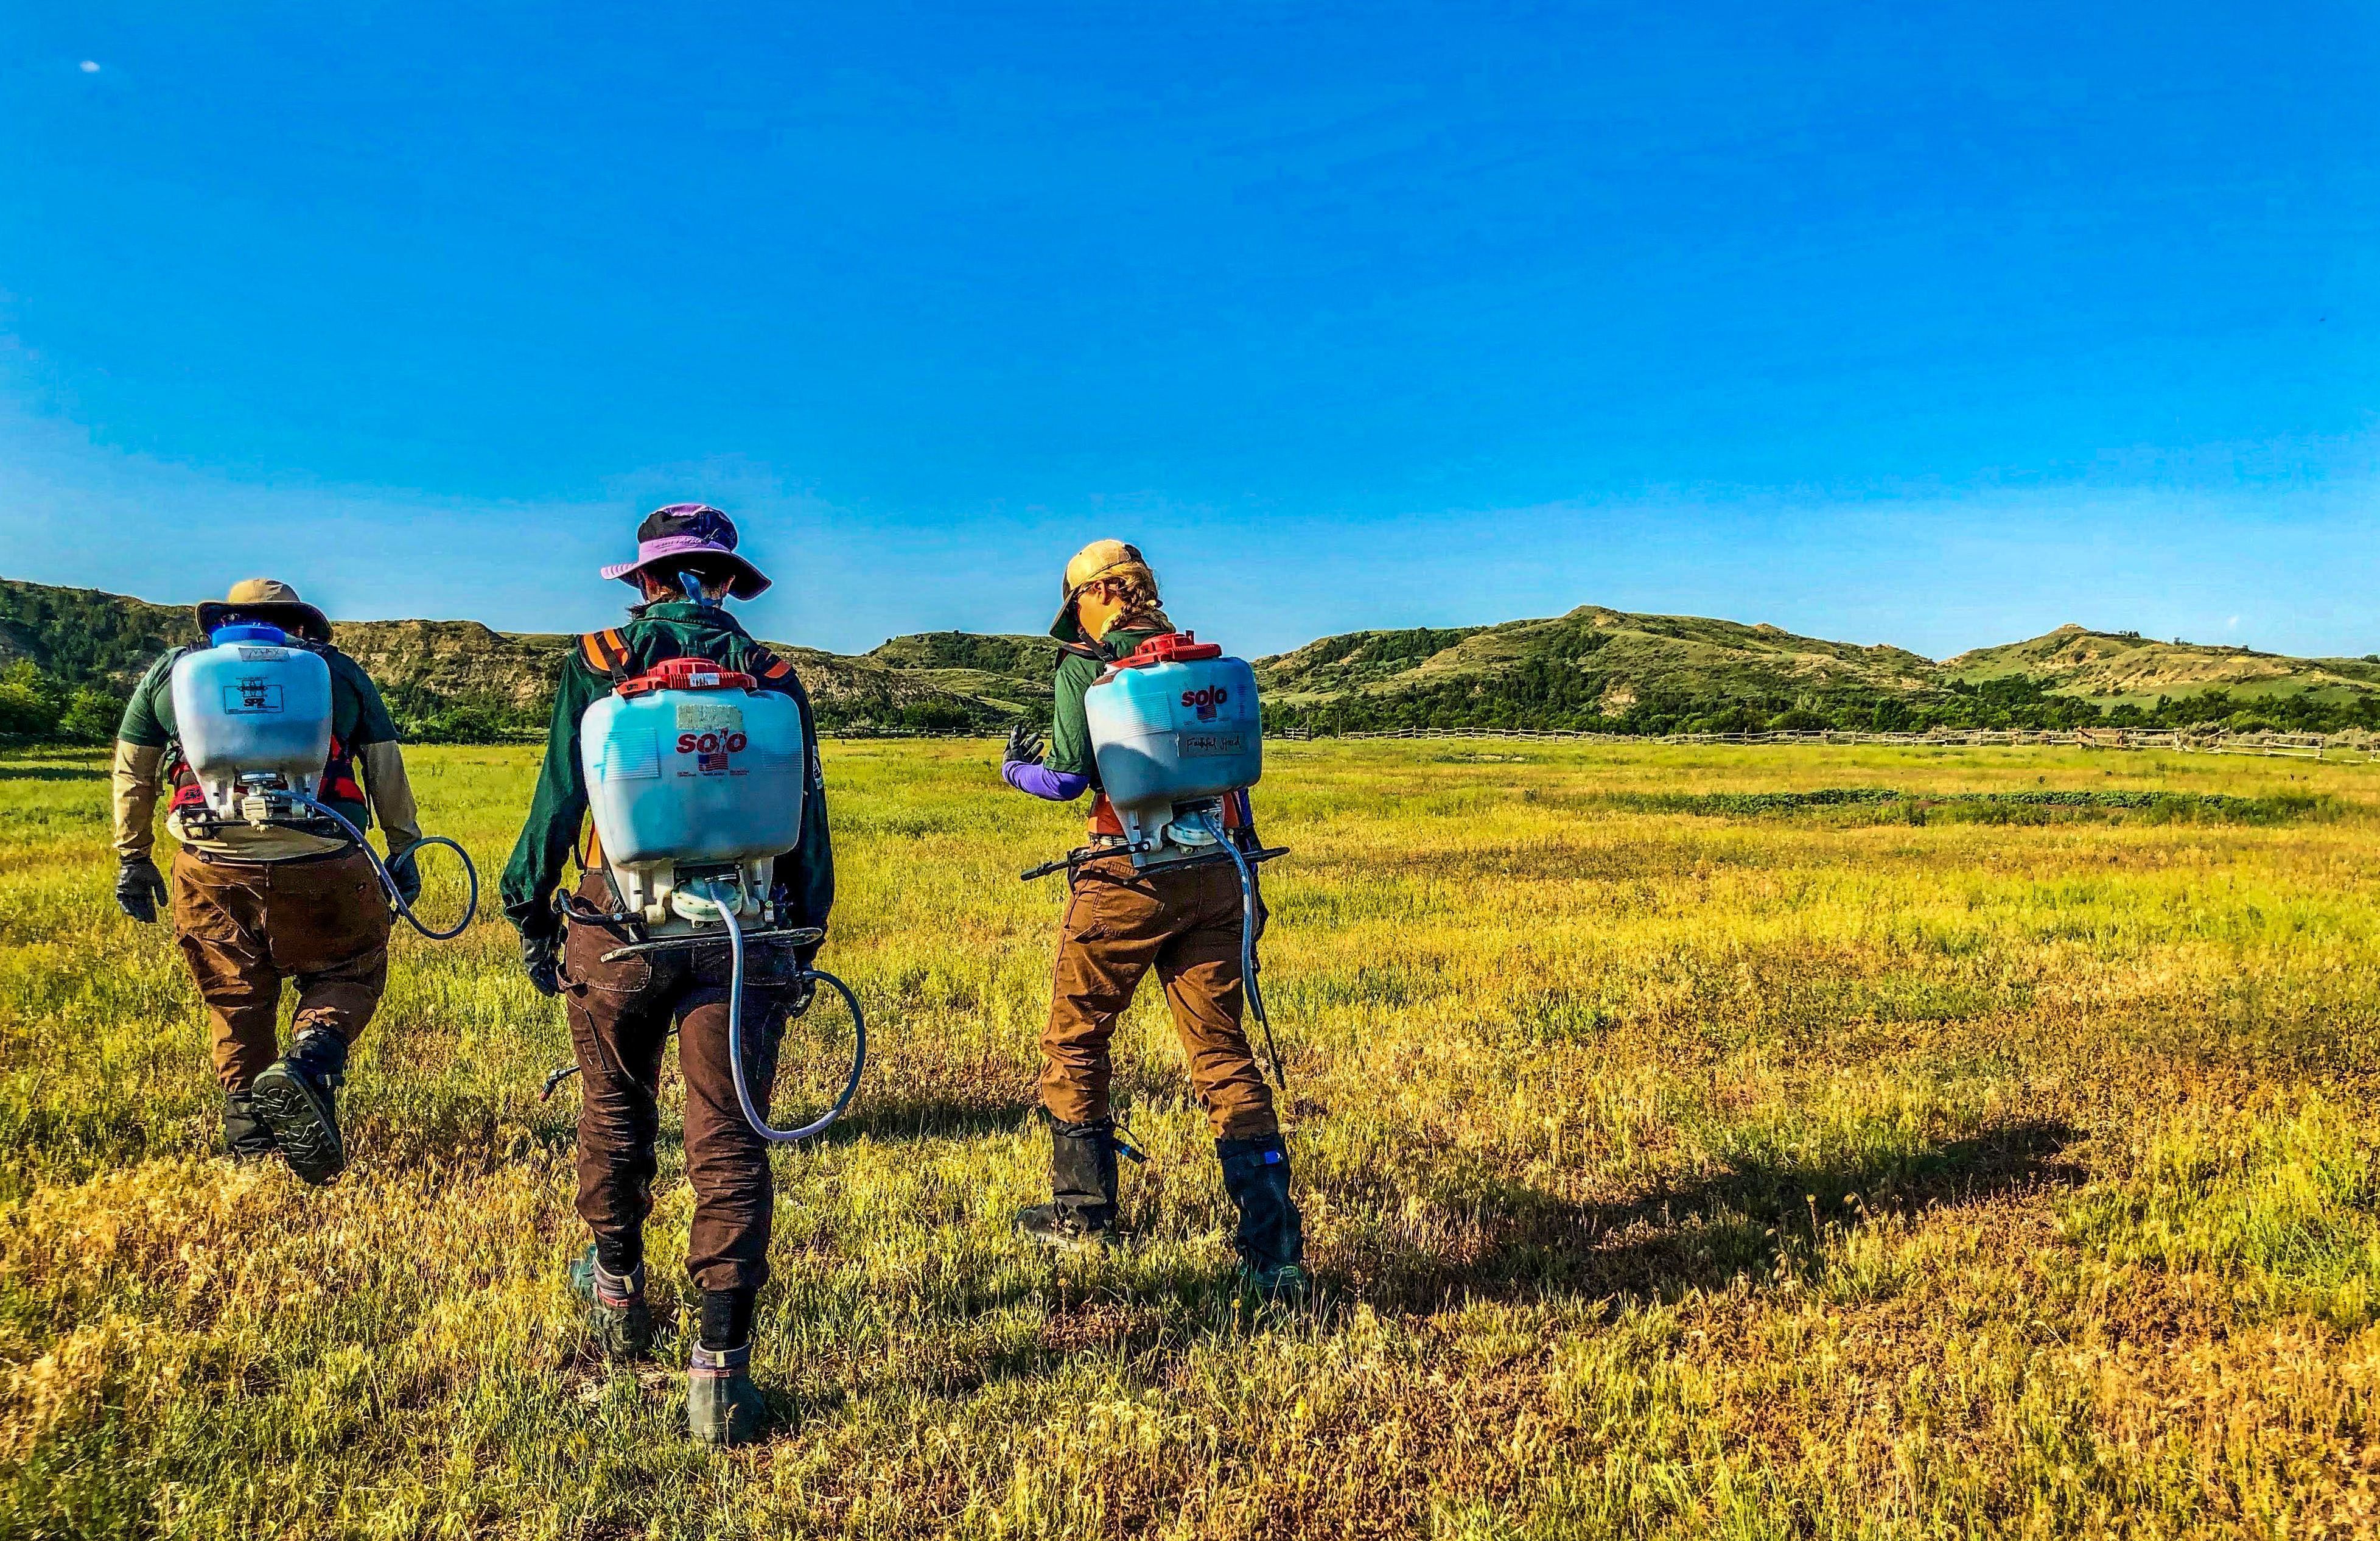 [Image description: Three MCC Members walking away from the photographer, into a beautiful wide open field, armed with weed spraying backpacks for range use.]